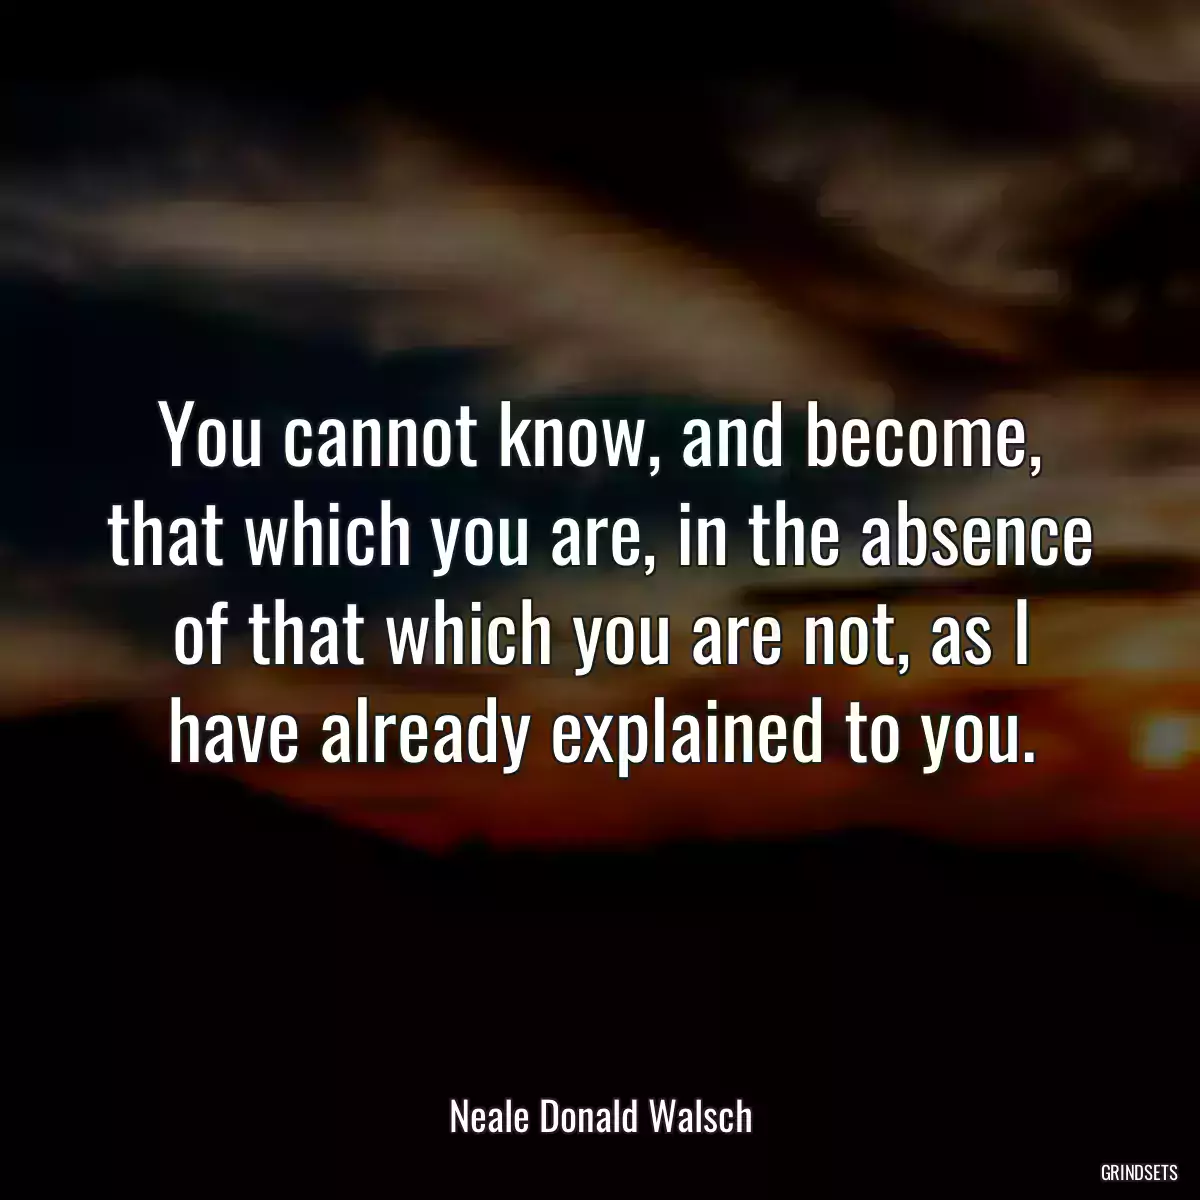 You cannot know, and become, that which you are, in the absence of that which you are not, as I have already explained to you.